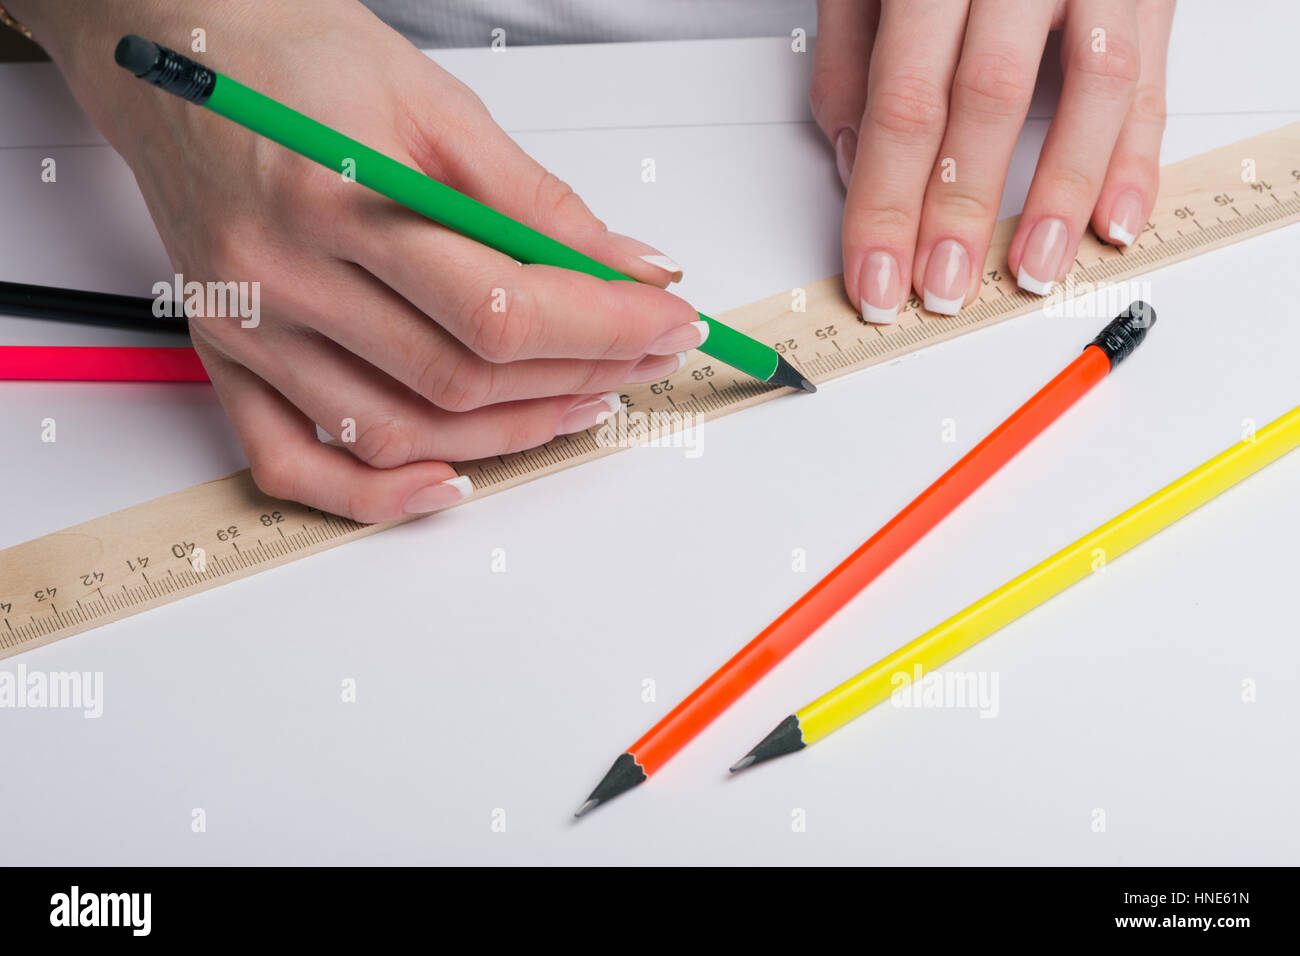 Female hands with classical French manicure draw a pencil by means of a ruler on clean standard sheet Stock Photo